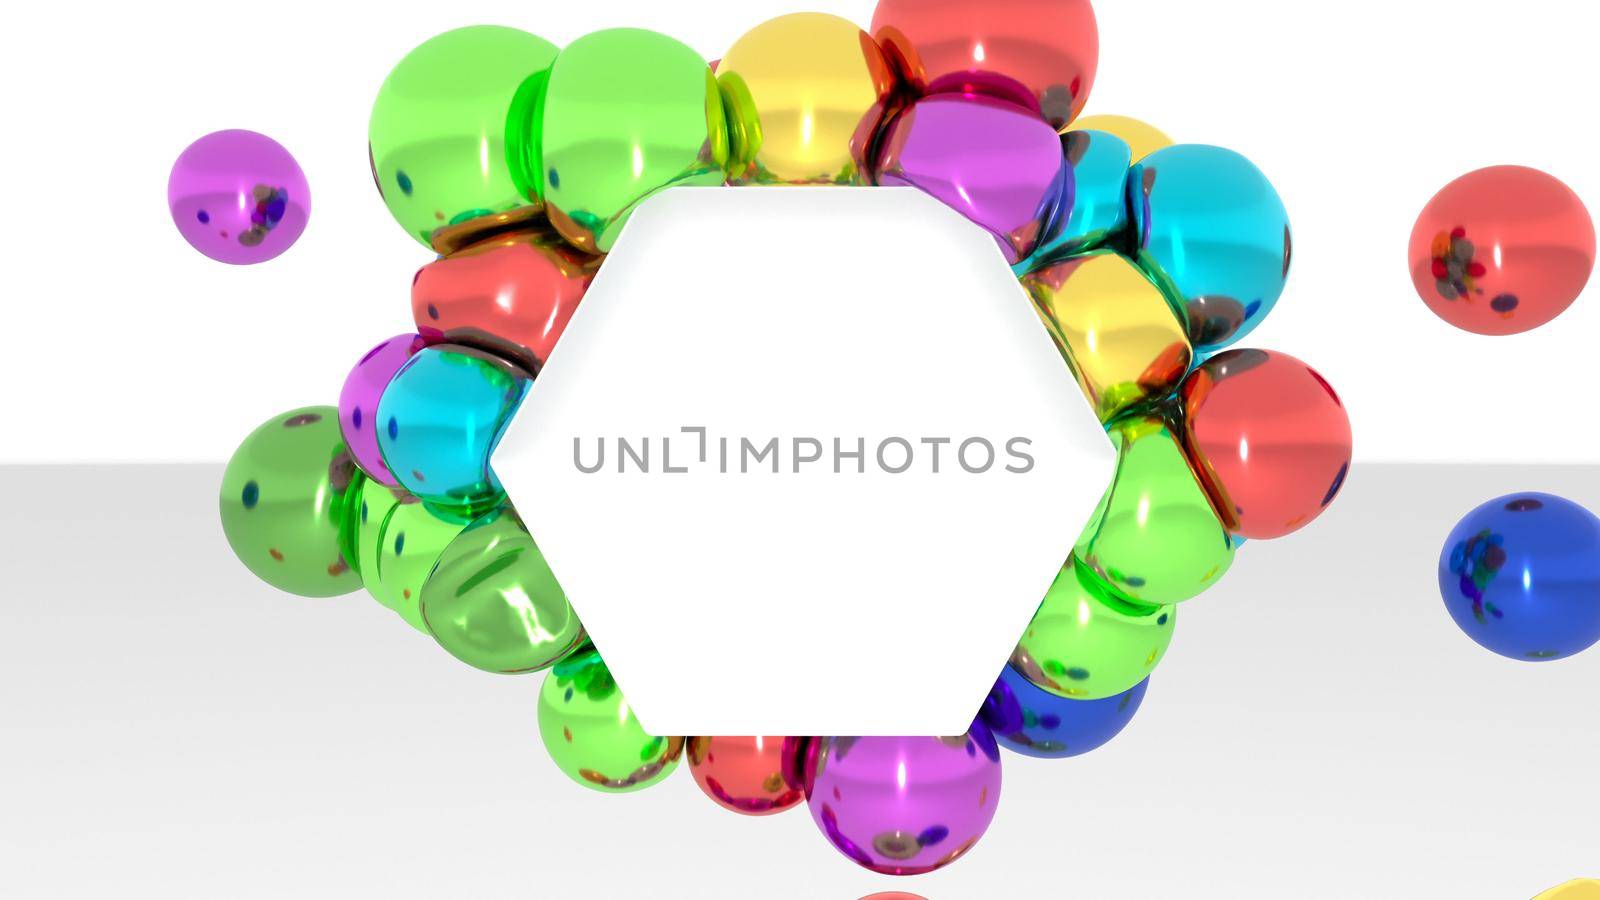 Modern 3d spheres soft body metal on white background 3d render by Zozulinskyi